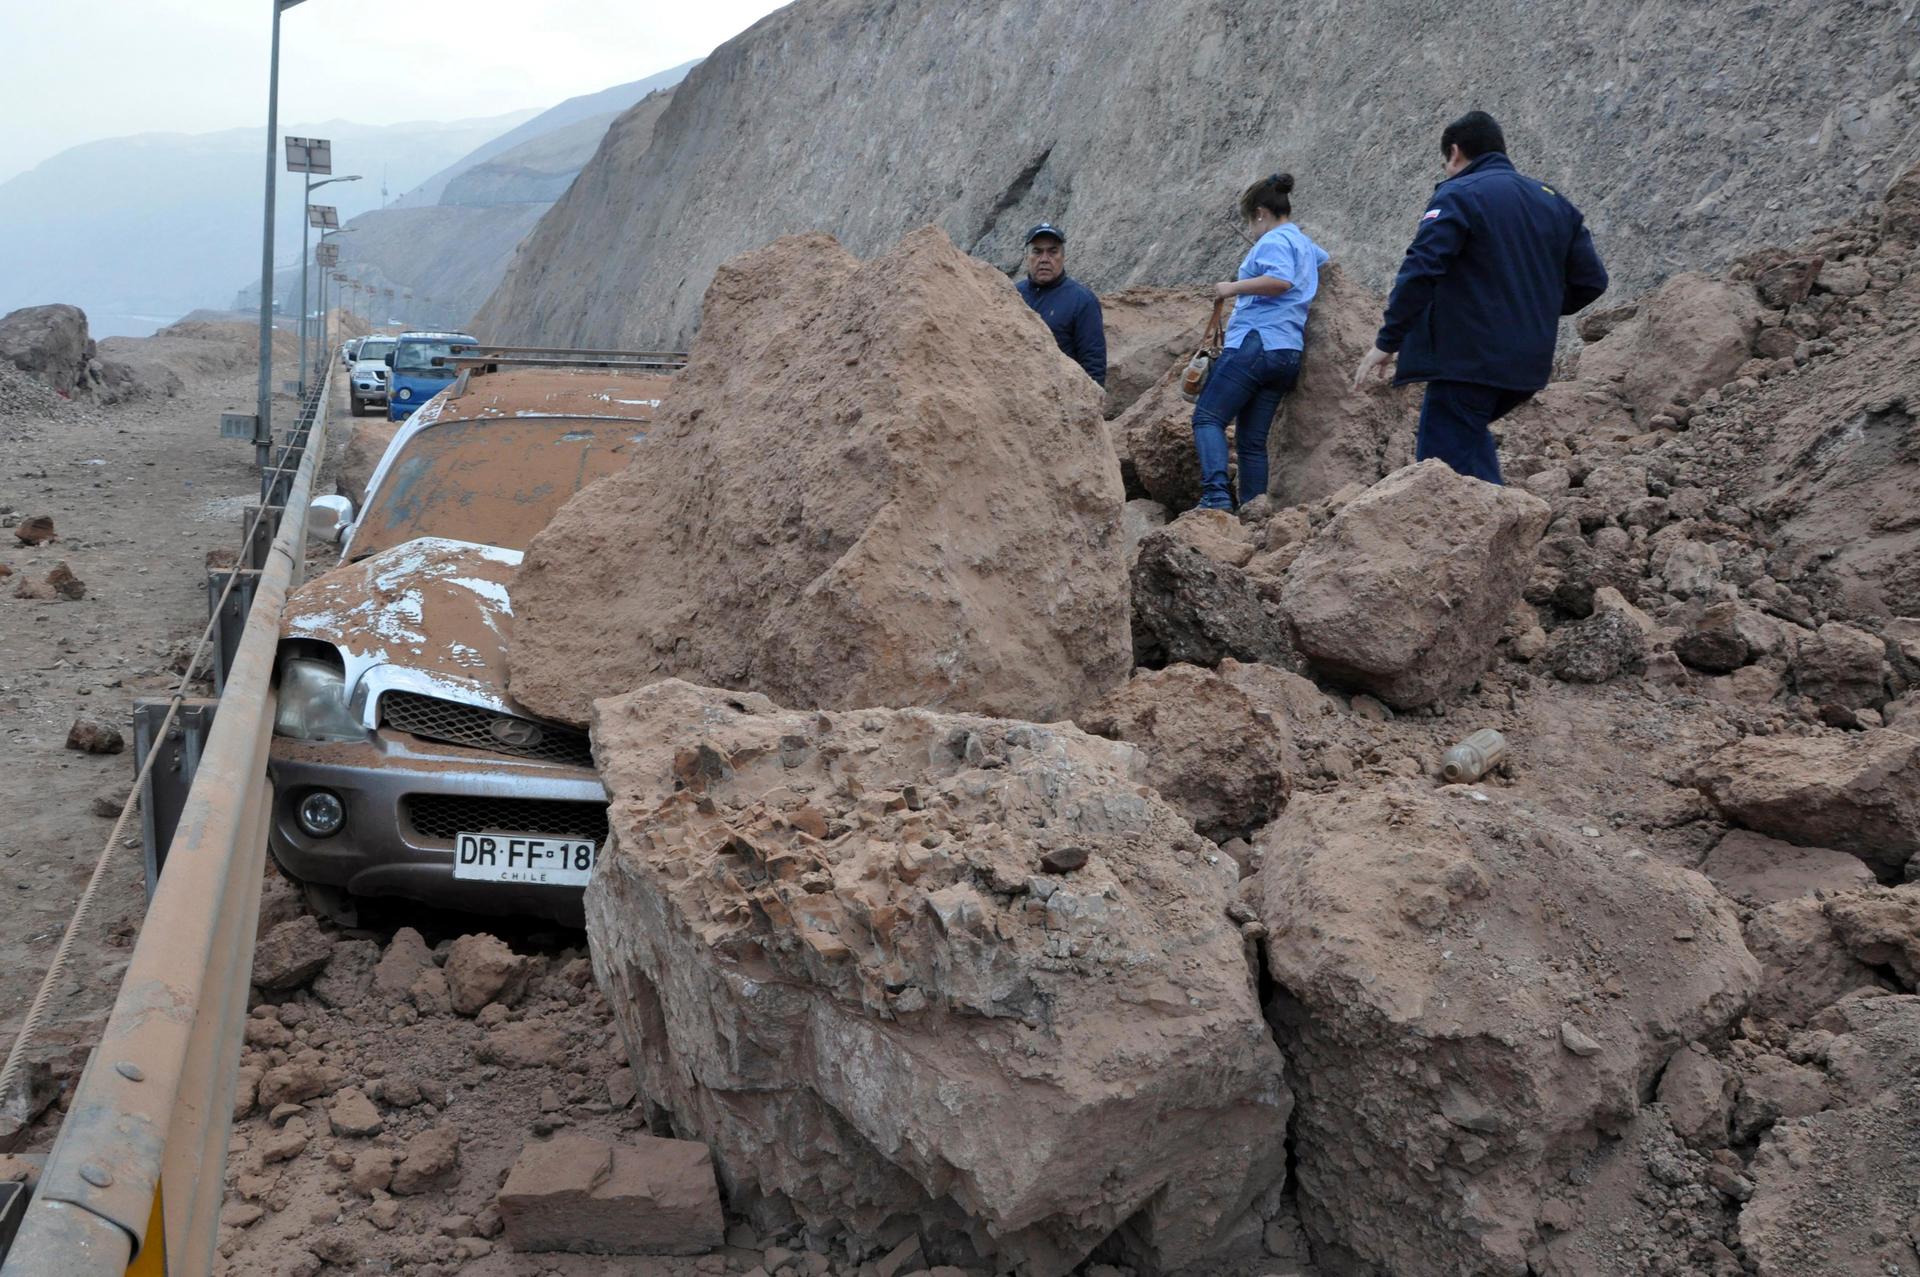 Rescue workers inspect a car caught under a landslide after an earthquake and tsunami hit the northern port of Iquique, April 2, 2014. The earthquake, with a magnitude of 8.2, struck off the coast of northern Chile near the copper exporting port of Iquiqu